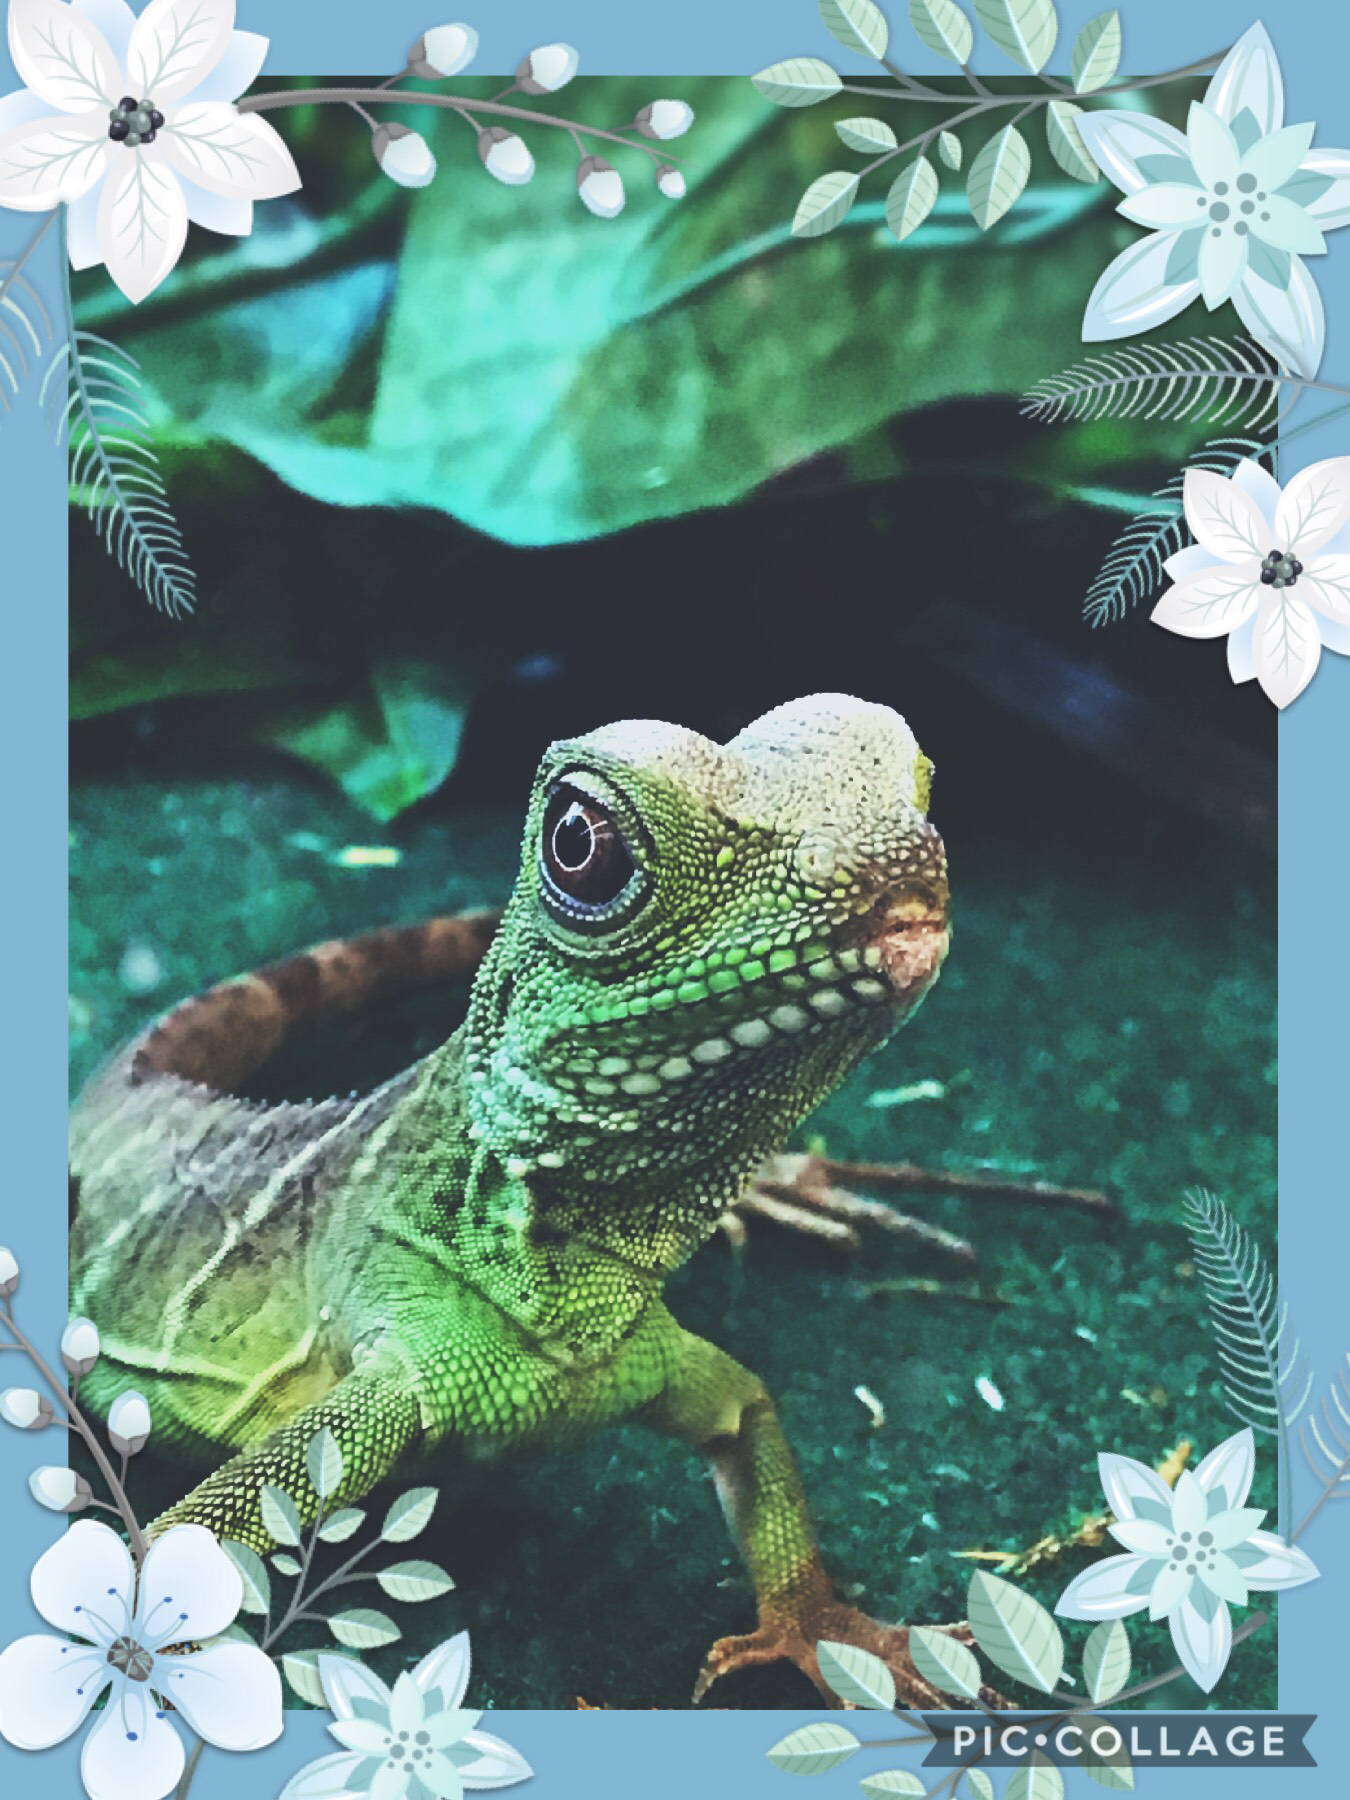 Pretty Chinese water Dragon 
From Petsmart